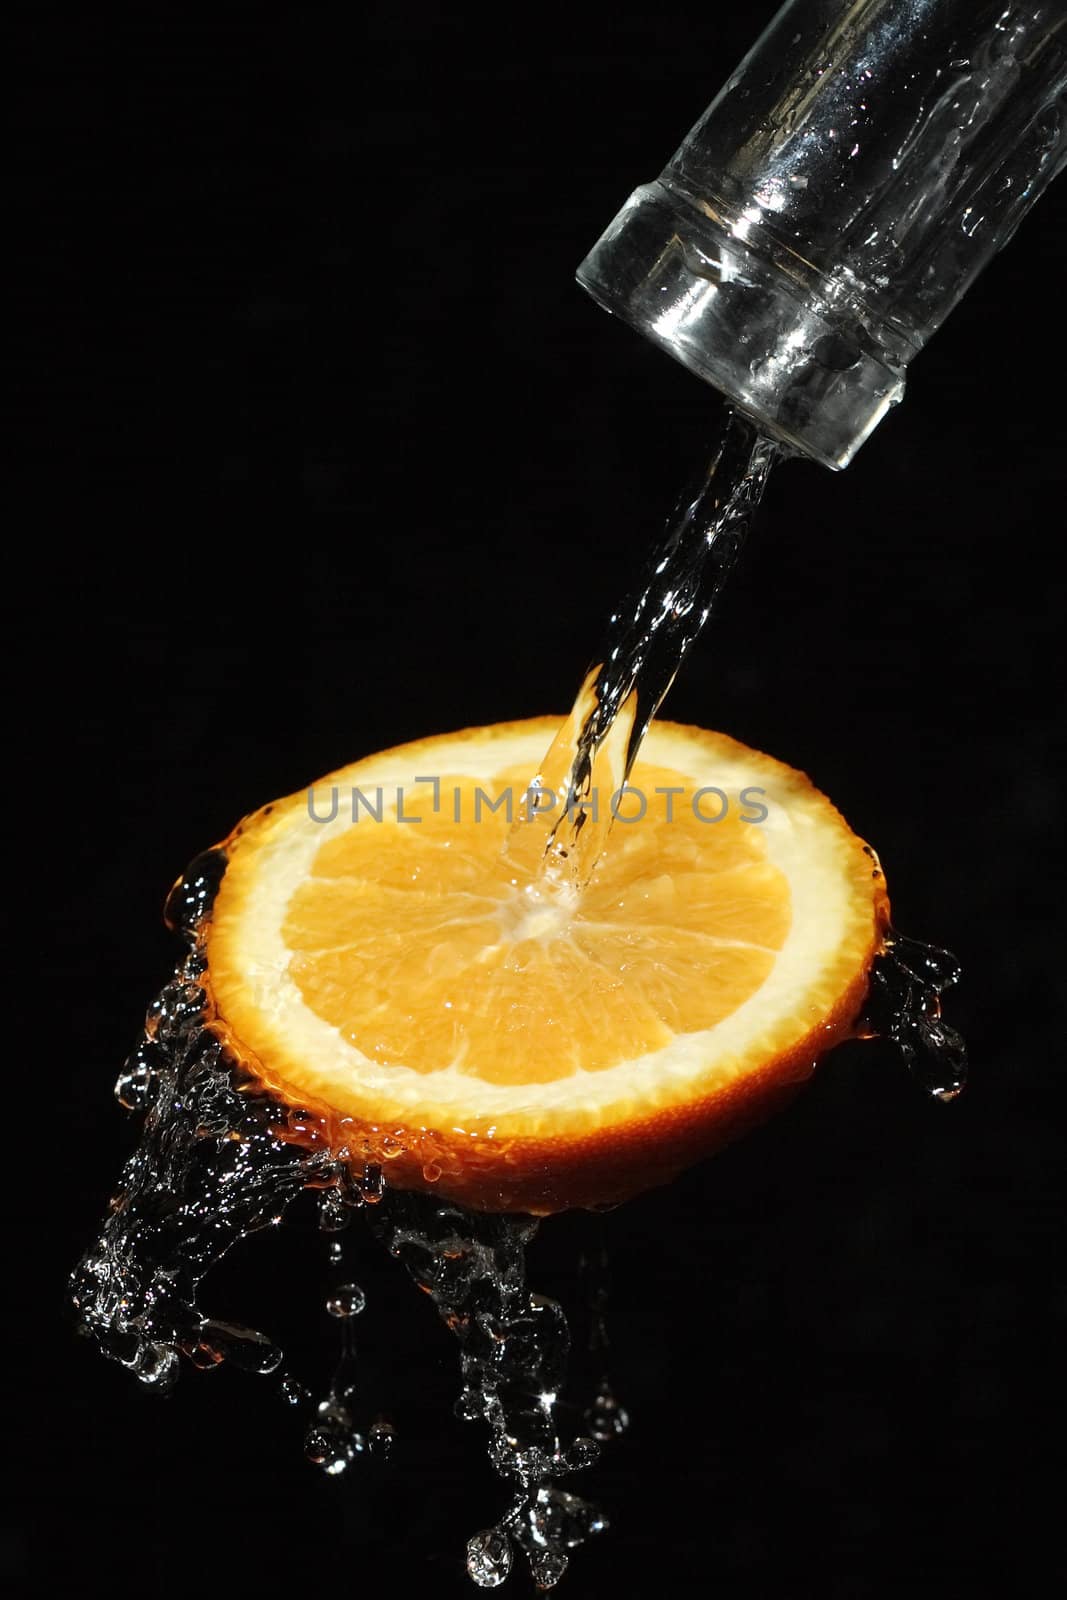 The water which is flowing down from segments of fruit
